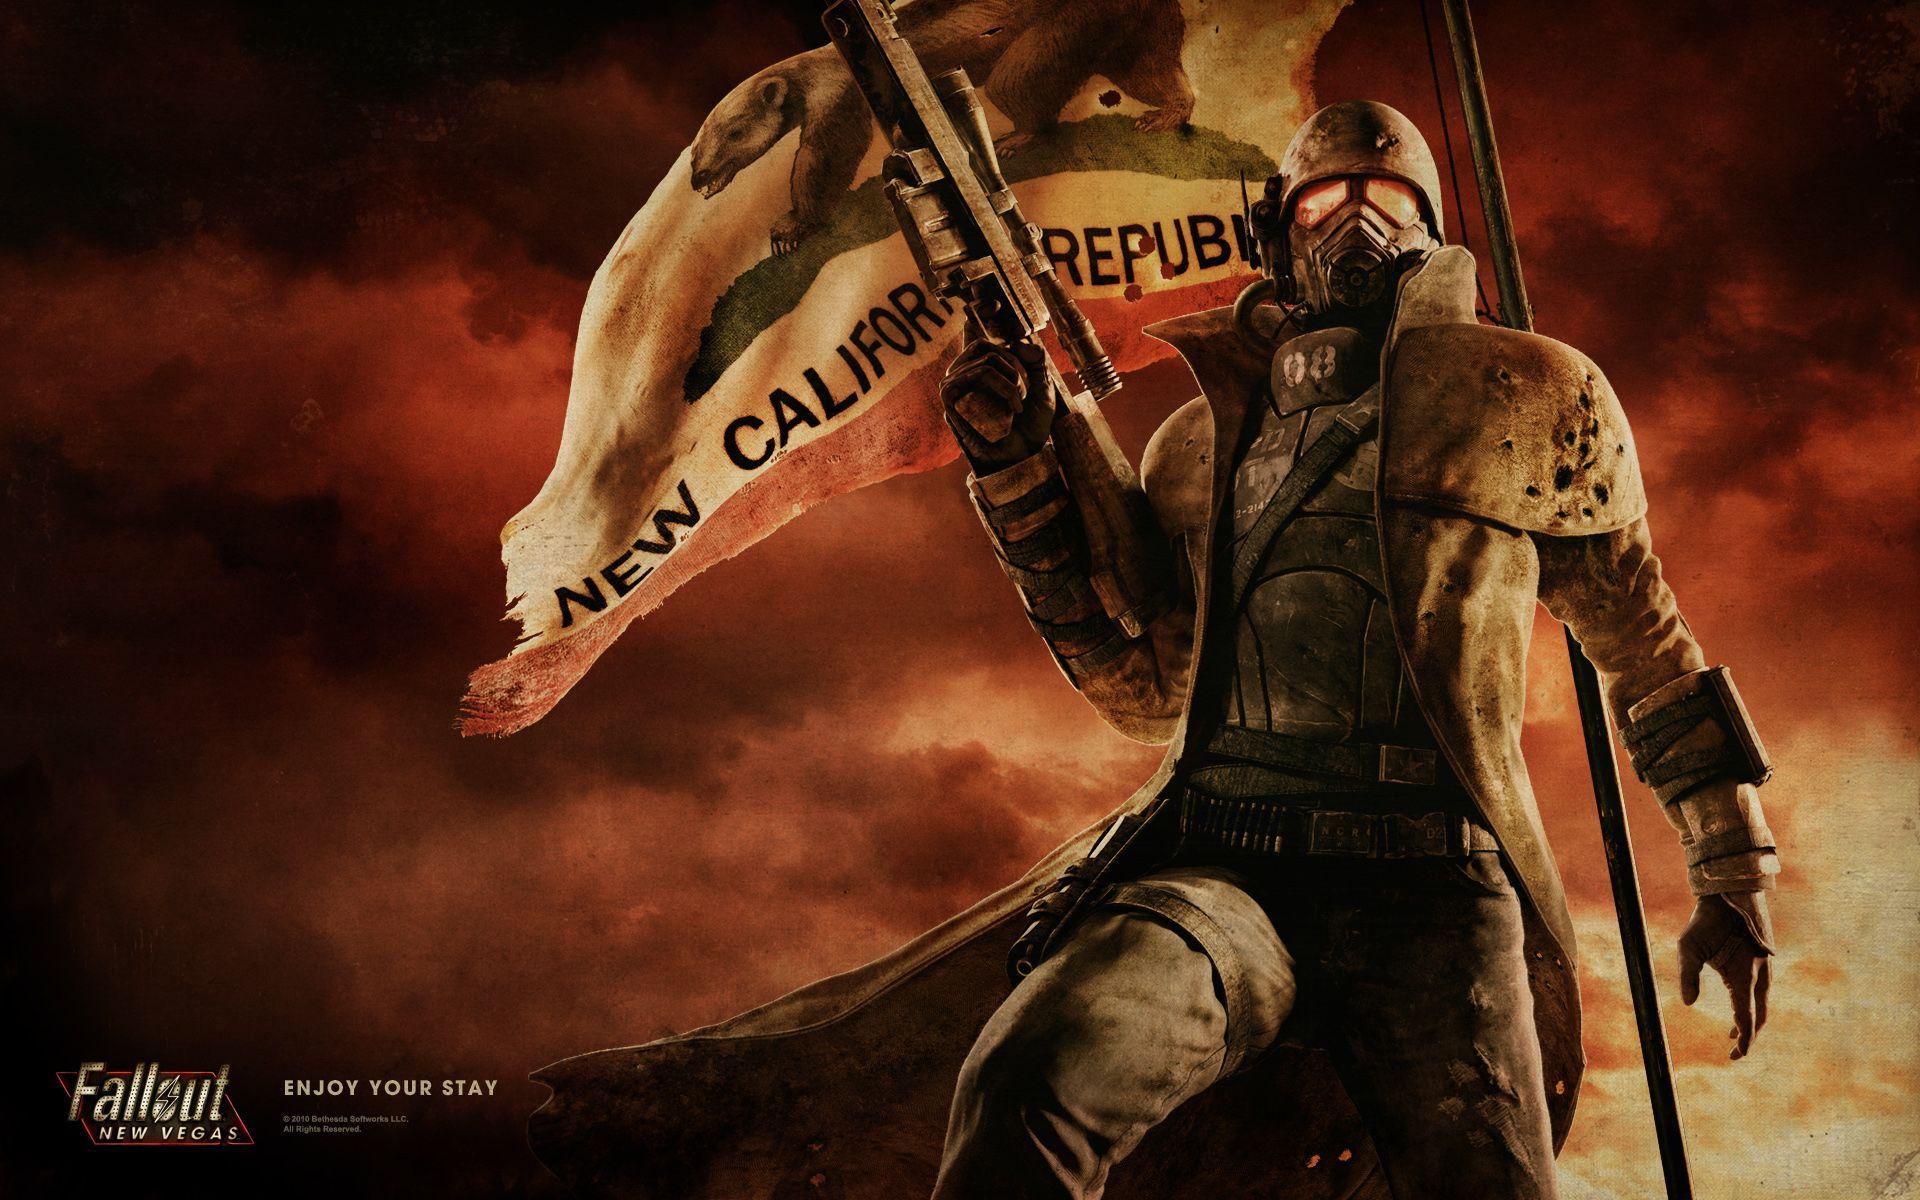 Fallout Ncr Wallpapers Wallpaper Cave Images, Photos, Reviews